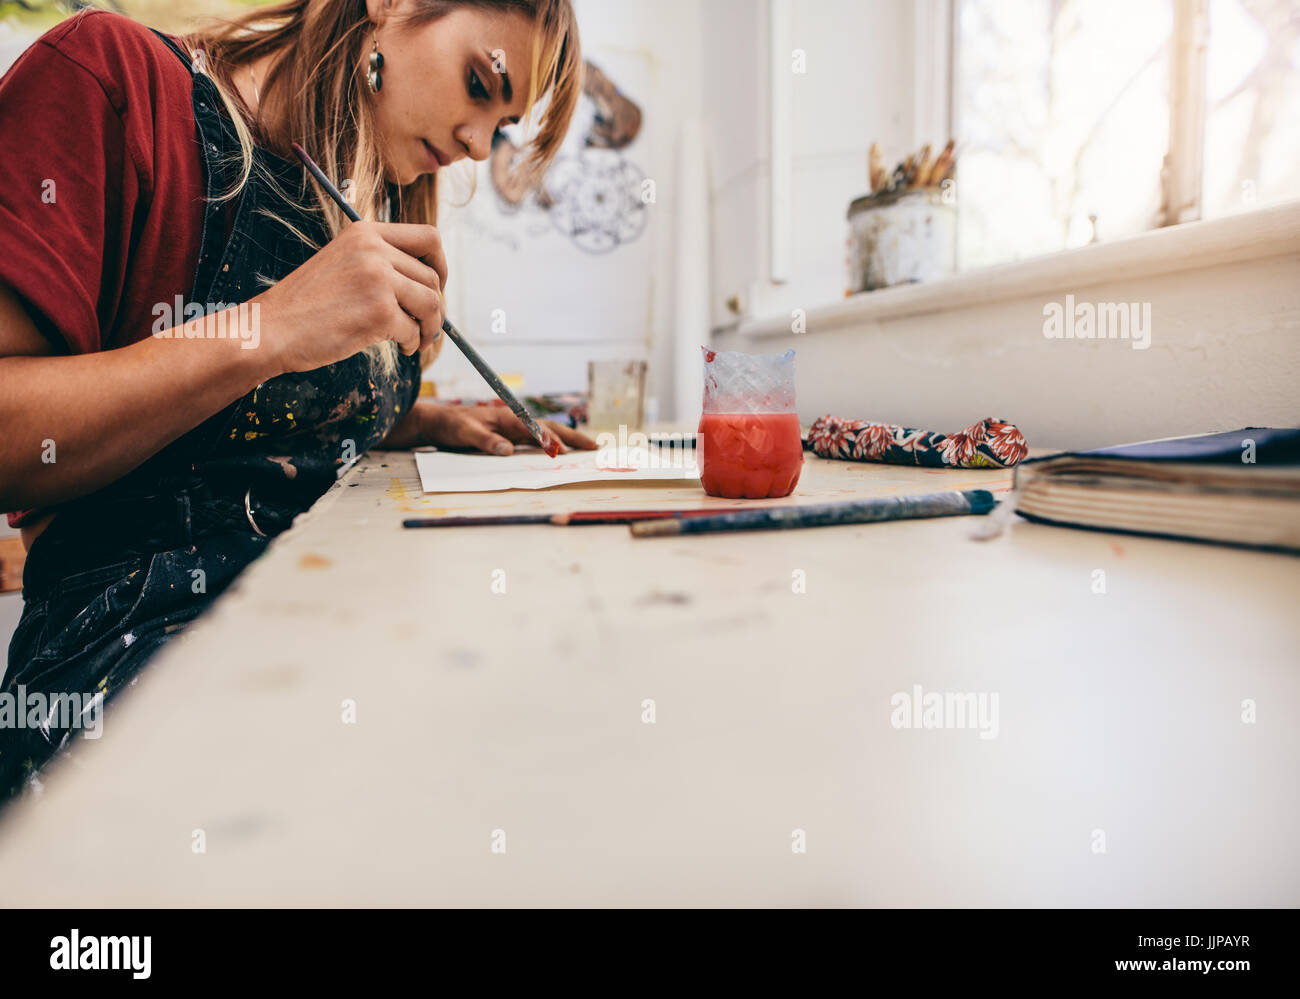 Image of beautiful woman drawing pictures in her workshop. Female artist painting in her studio. Stock Photo